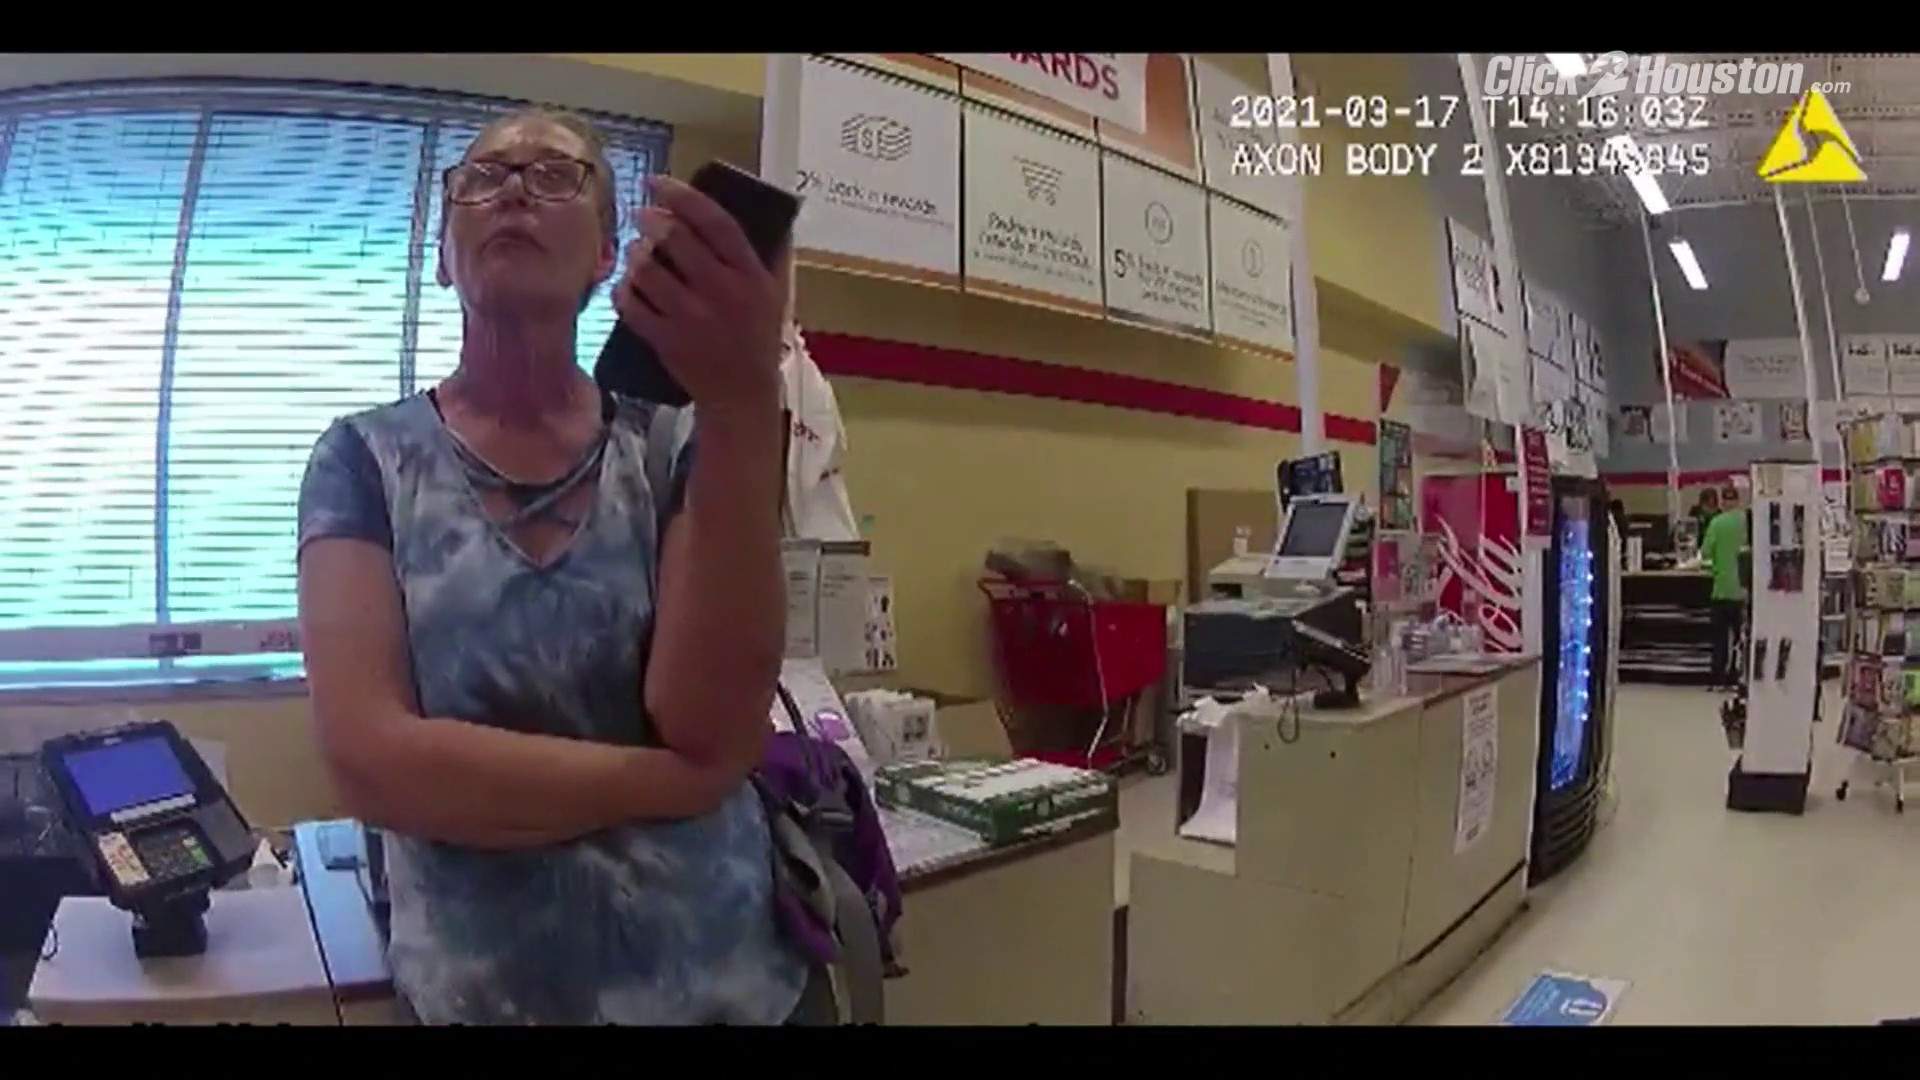 VIDEOS: Bodycam footage shows maskless Texas woman’s 2nd arrest within a week